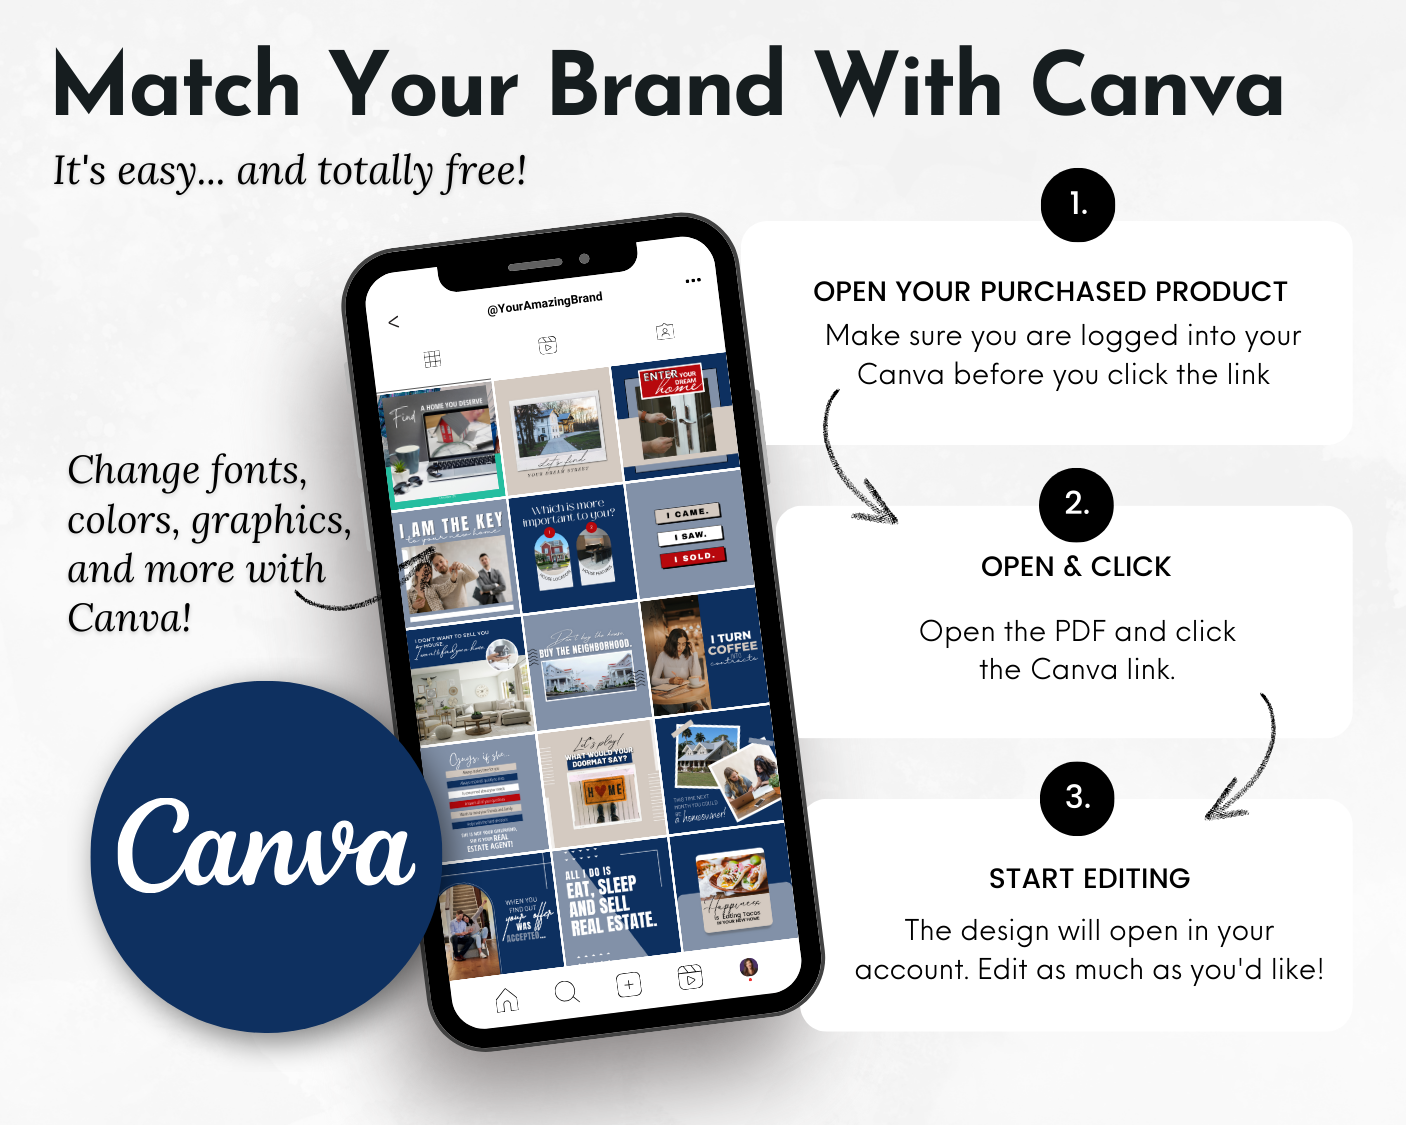 Match your Socially Inclined brand of Real Estate Social Media 200 Post Bundle - With Canva Templates to reach your target audience on social media.